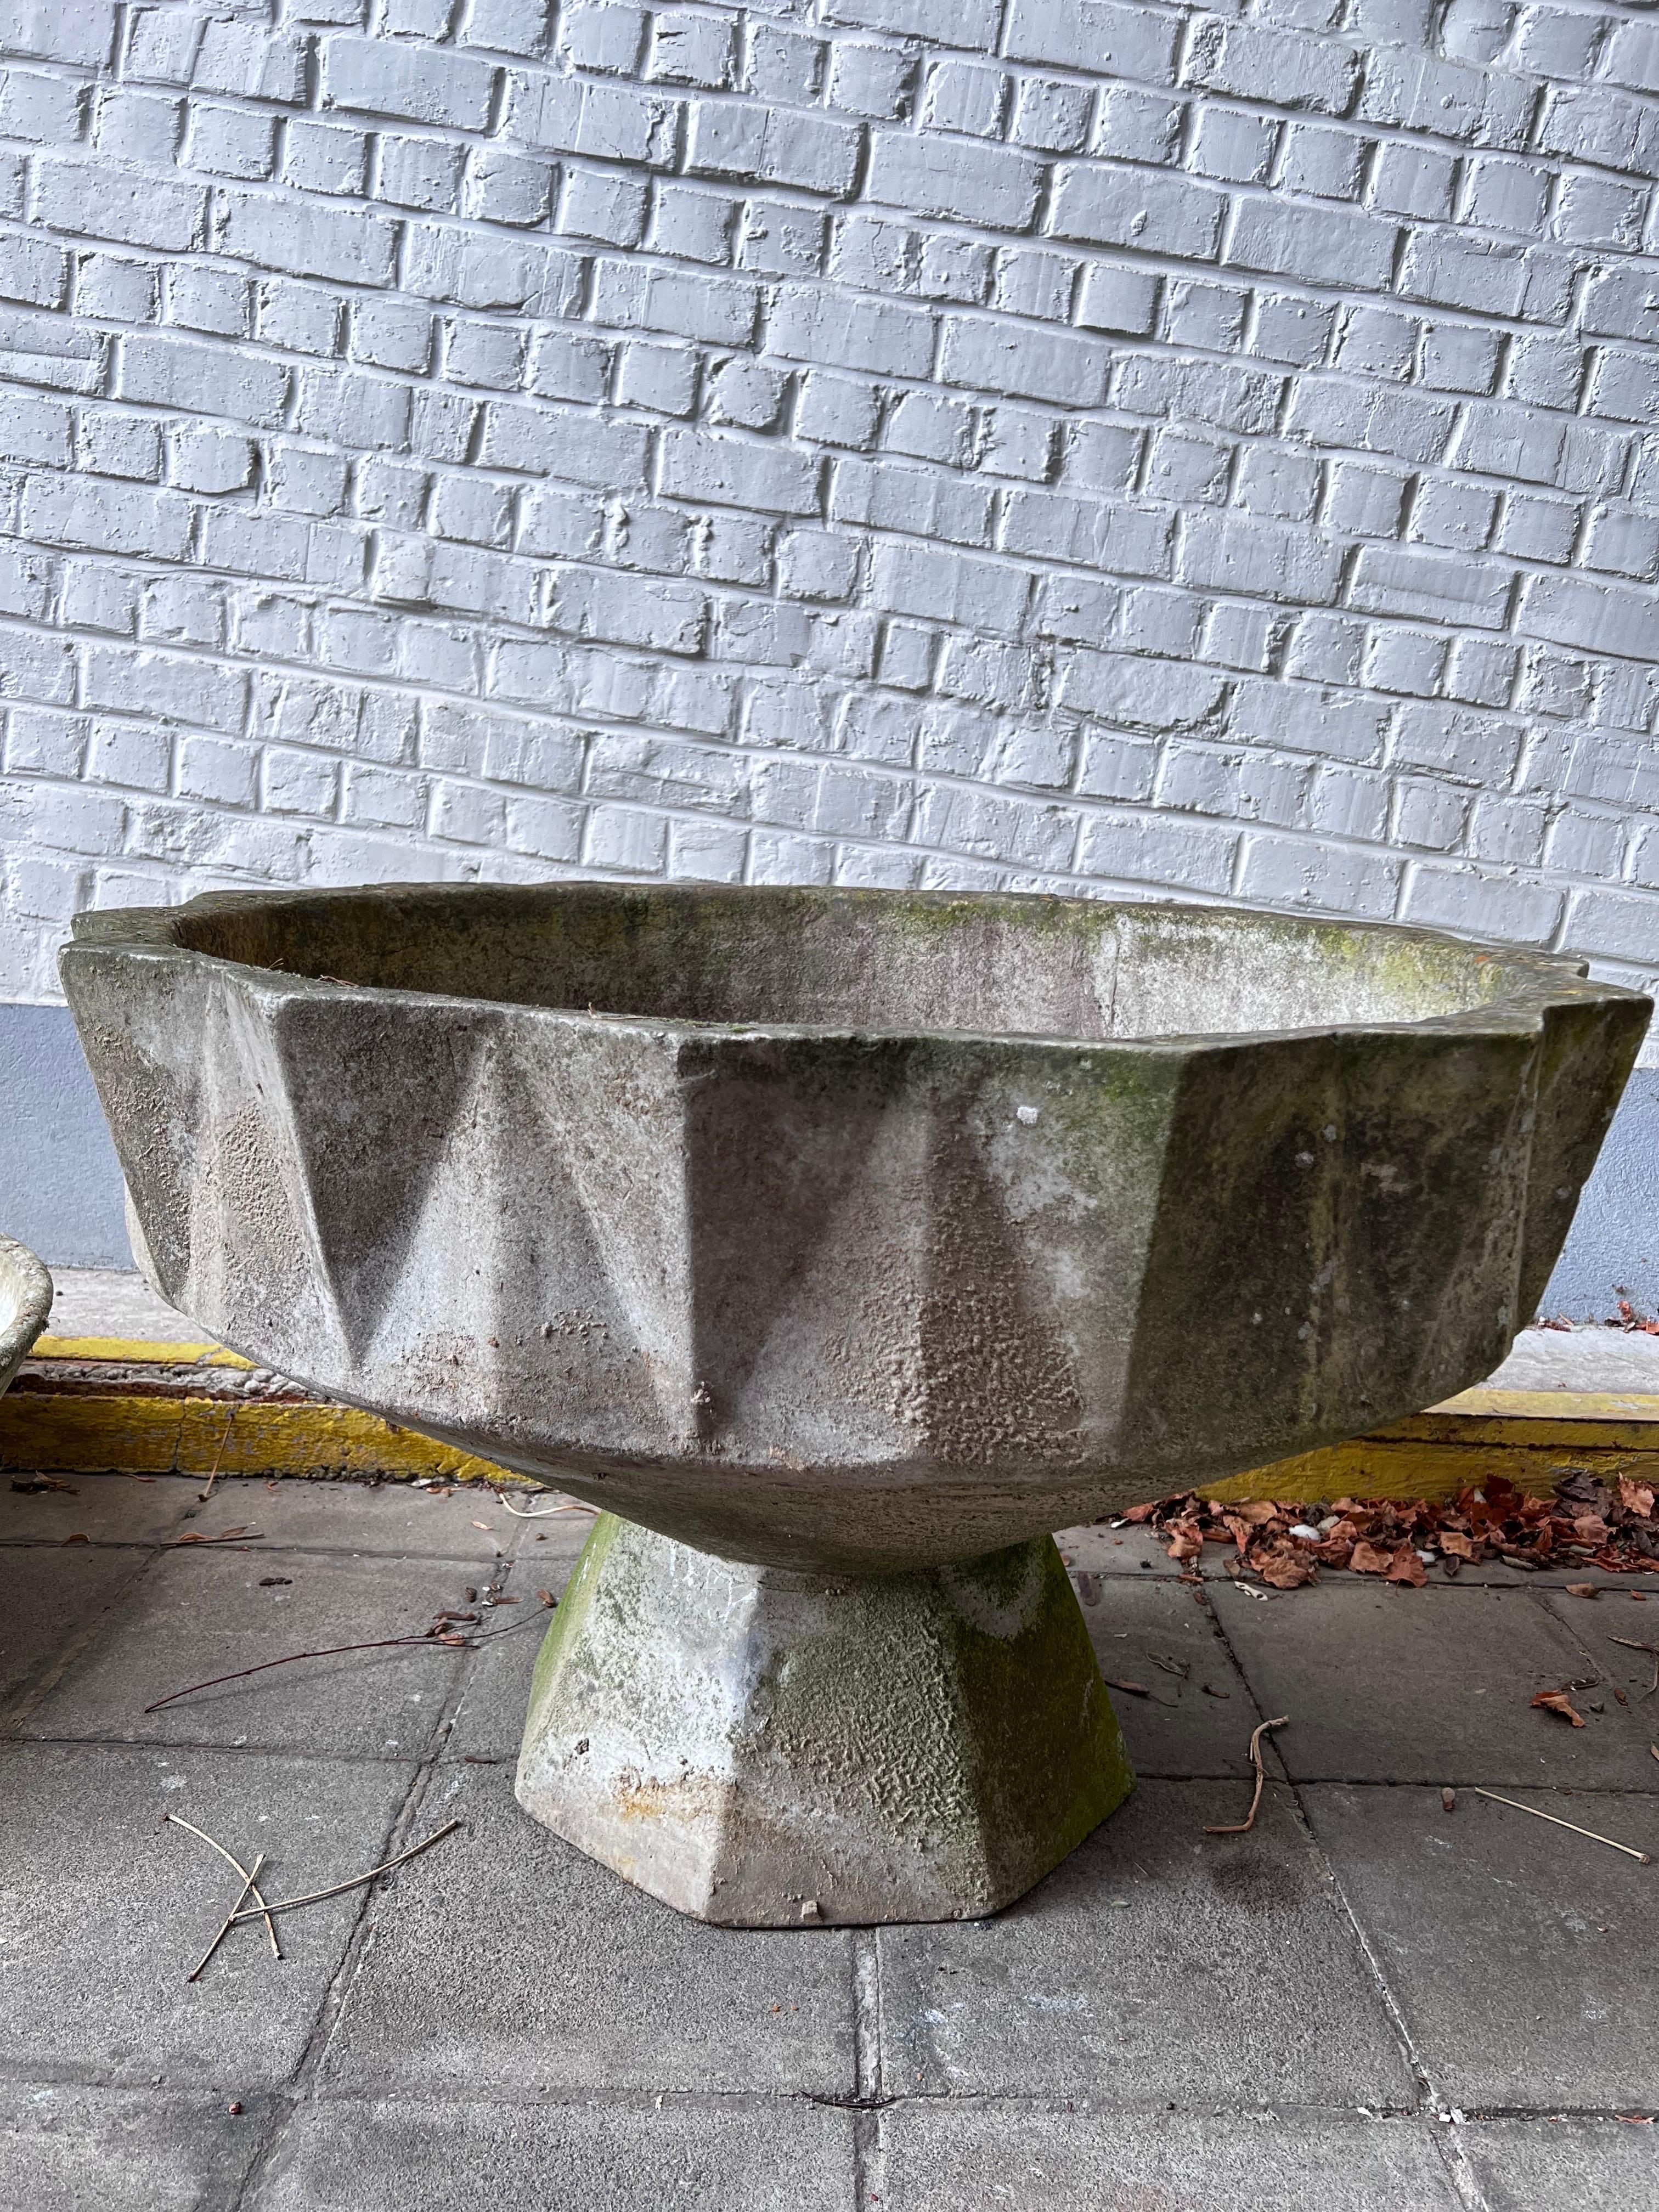 This is a planter like a sculpture! made out of fiber concrete in the 1950's in Switzerland. It is the biggest and strongest from that series. We have two of that model and measurements. We have more models in smaller